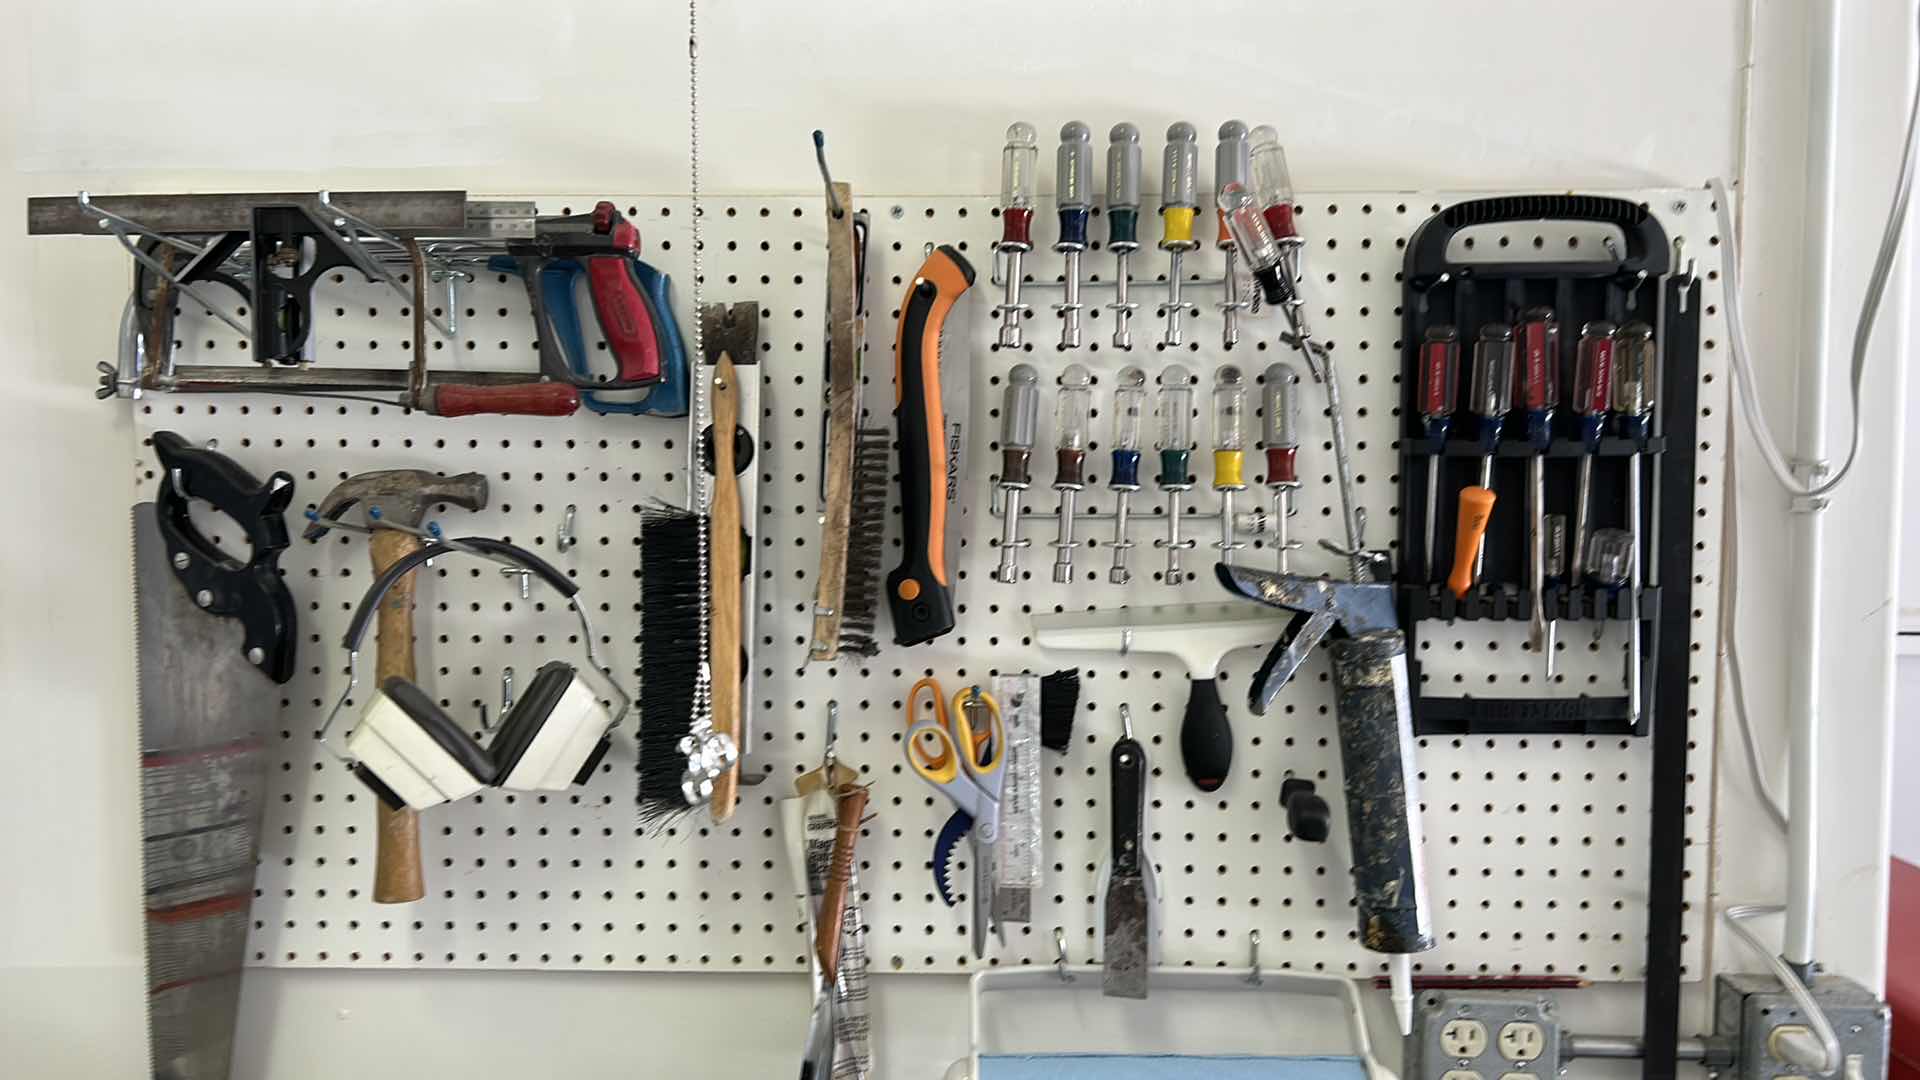 Photo 3 of CONTENTS SIDE WALL IN GARAGE, INCLUDES WORK BENCH, AND ALL TOOLS ON BENCH, PEG BOARD AND HANGING LIGHT FIXTURE 43” x 25.5” x H38”